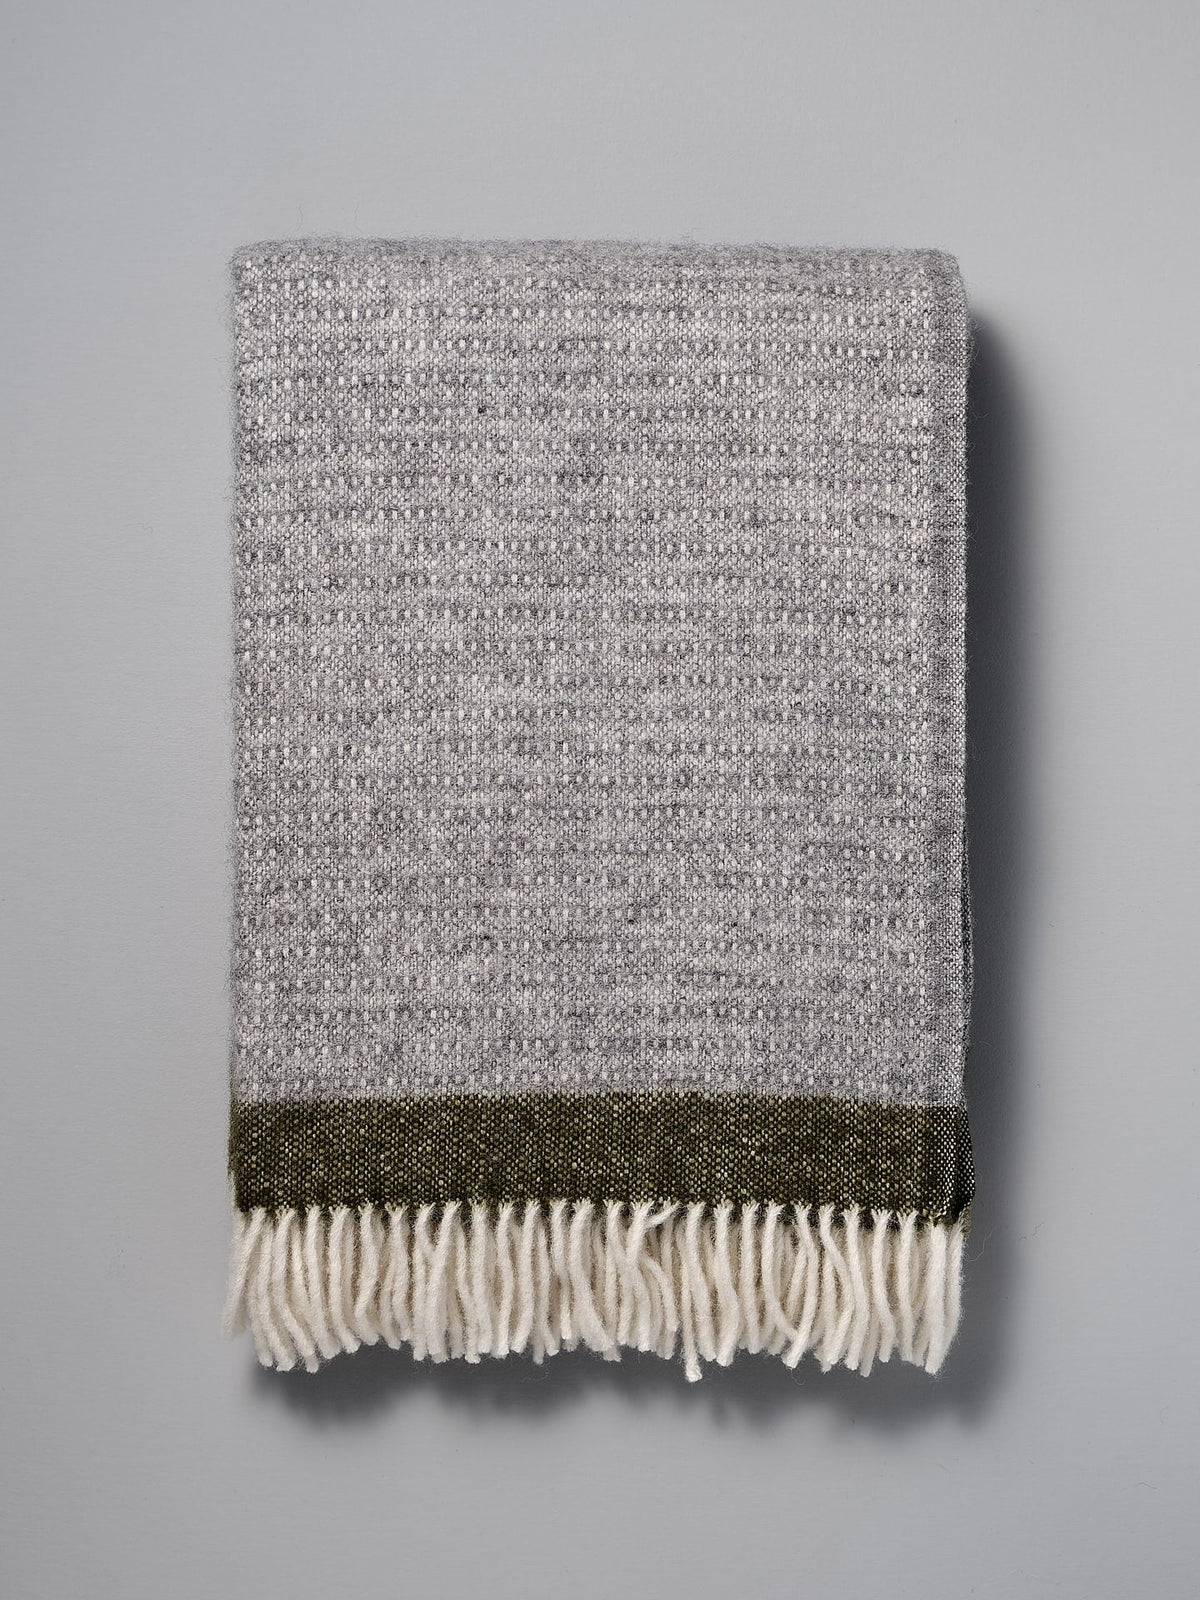 A Klippan Hampus Wool Throw - Grey Green with fringes on a white background.